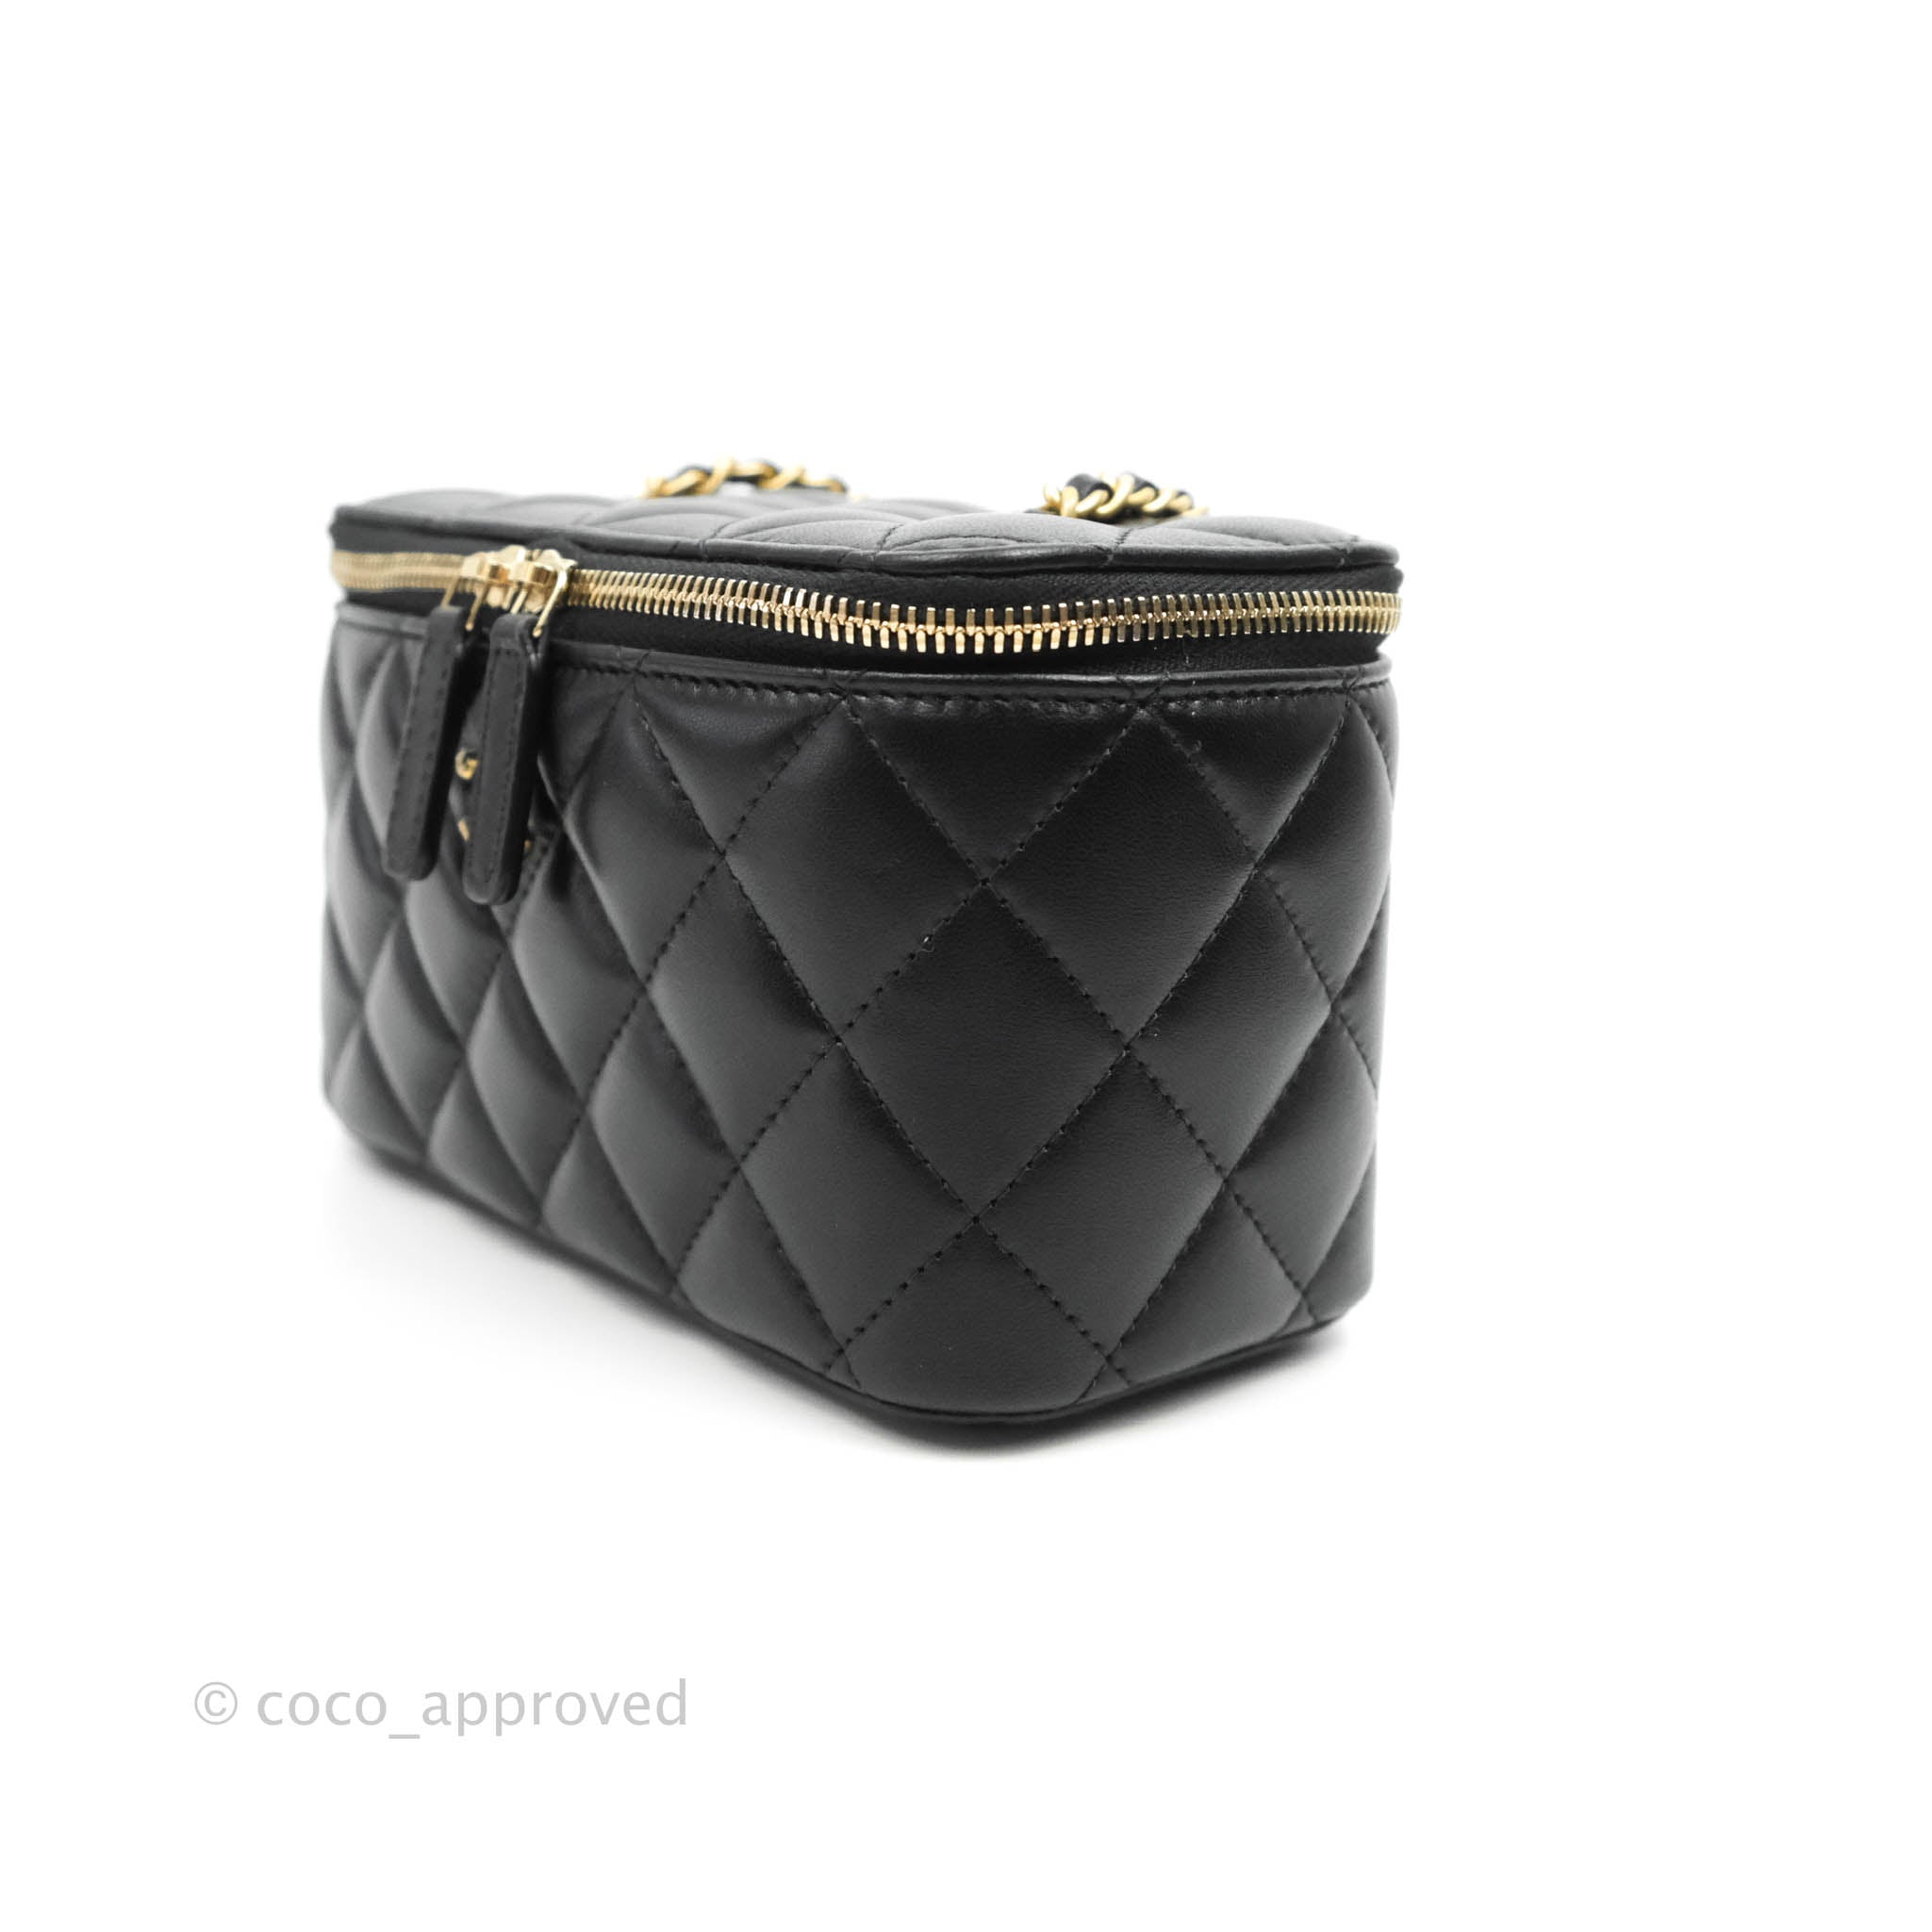 Sold at Auction: Chanel Patent Leather Cosmetic Pouch